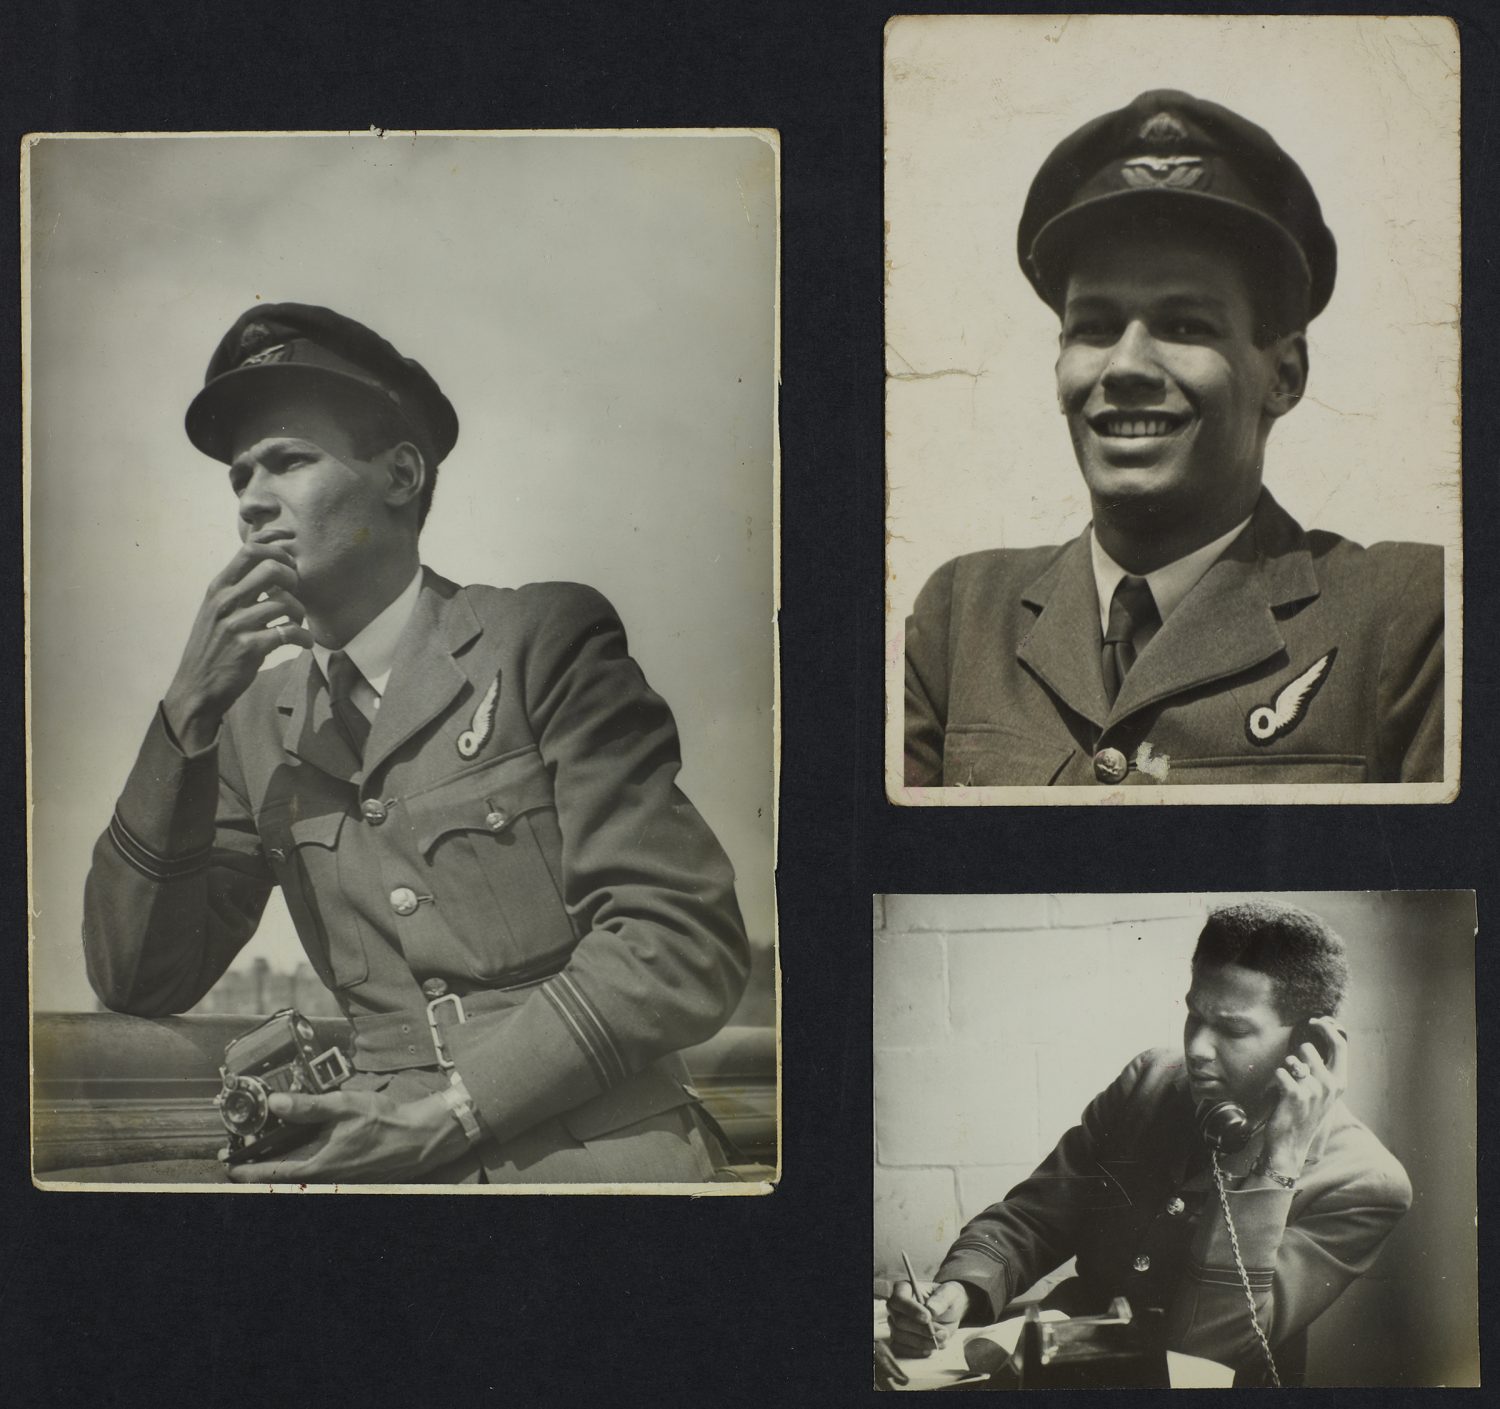 Photographs of Cy Grant in his 1940s uniform. (Photo courtesy of Cy Grant archive LMA/4709 held at London Metropolitan Archives, City of London)
